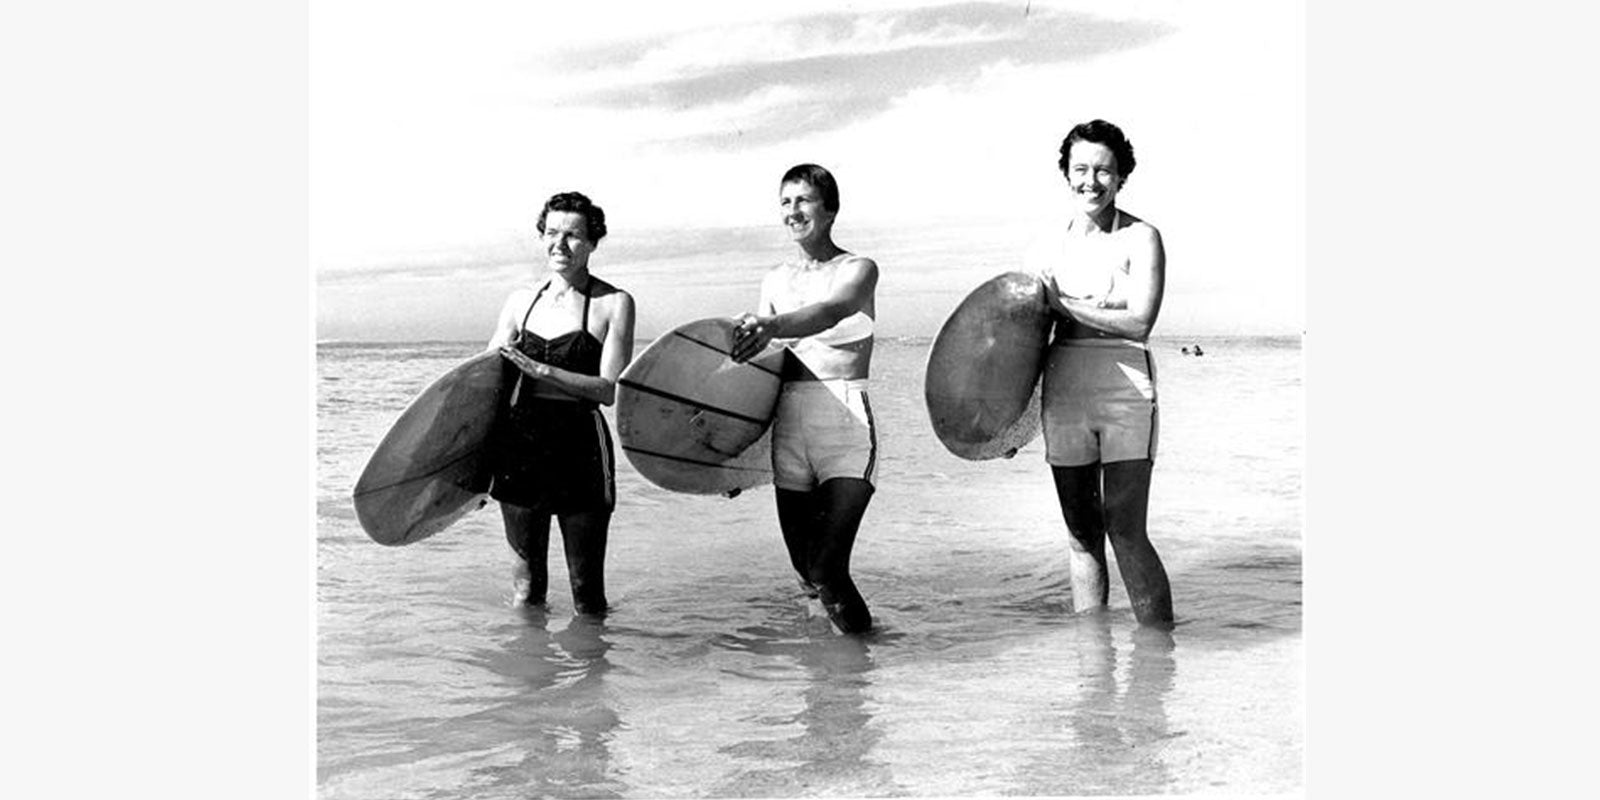 Women in Surfing: A Brief History